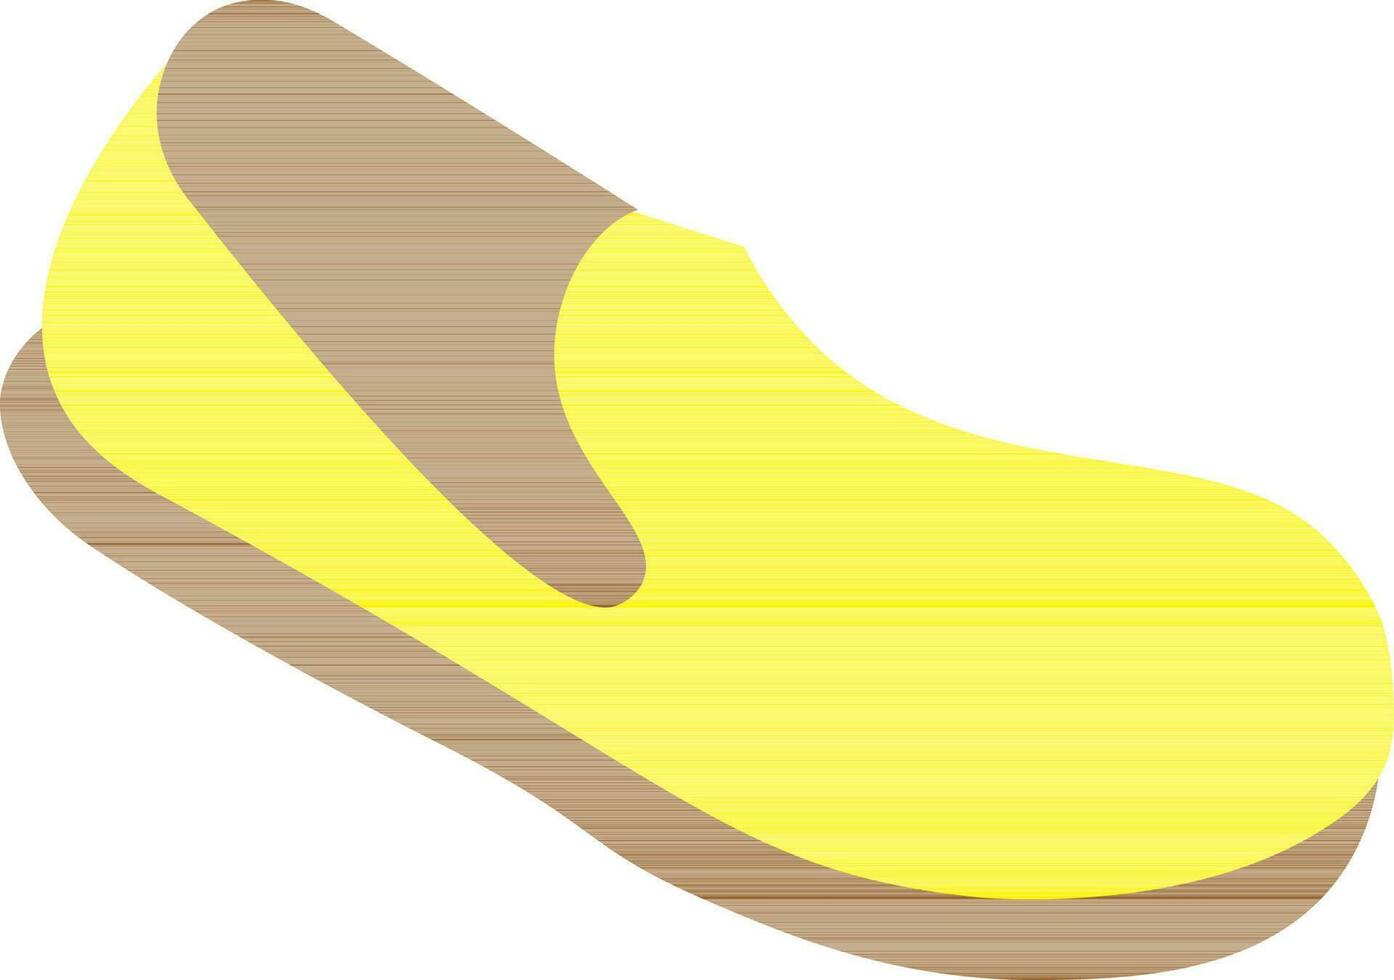 Yellow and Brown Shoes Icon in Flat Style. vector